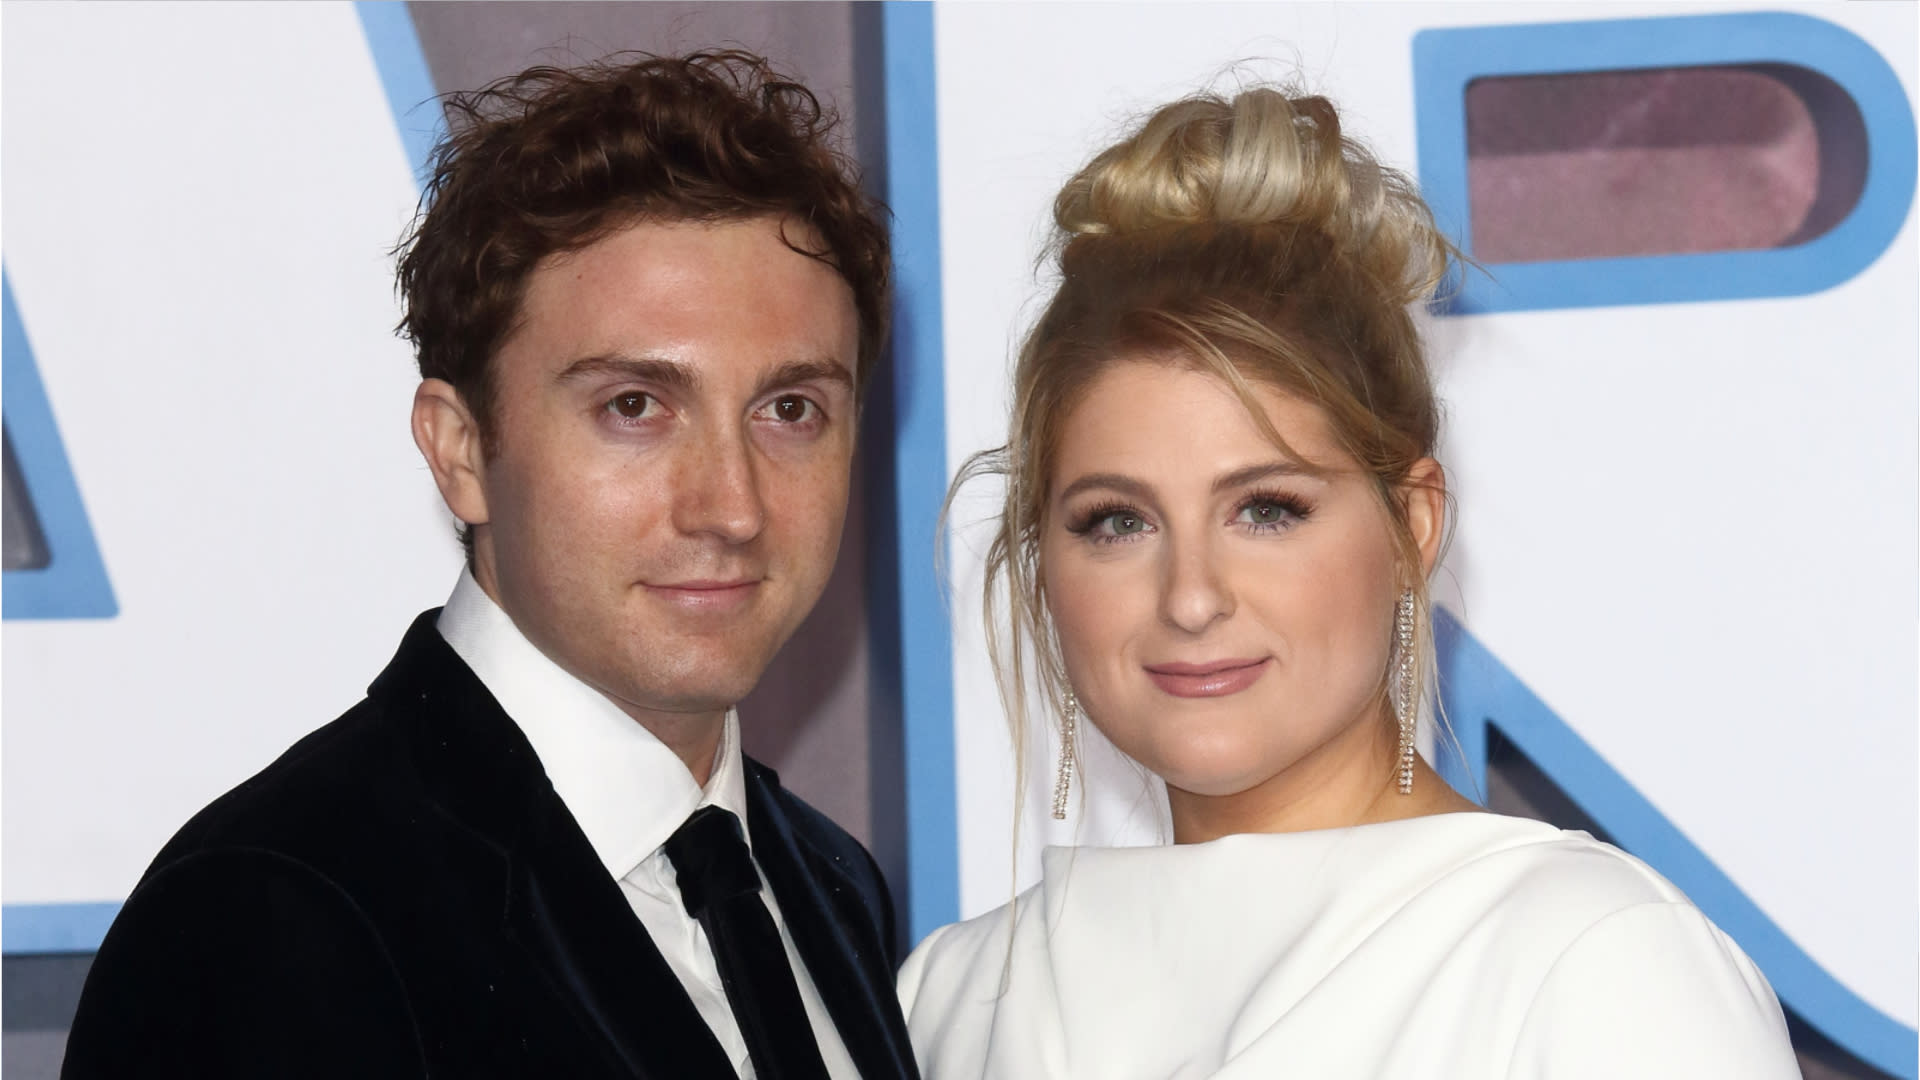 Meghan Trainor Reveals She Was Diagnosed With Gestational Diabetes